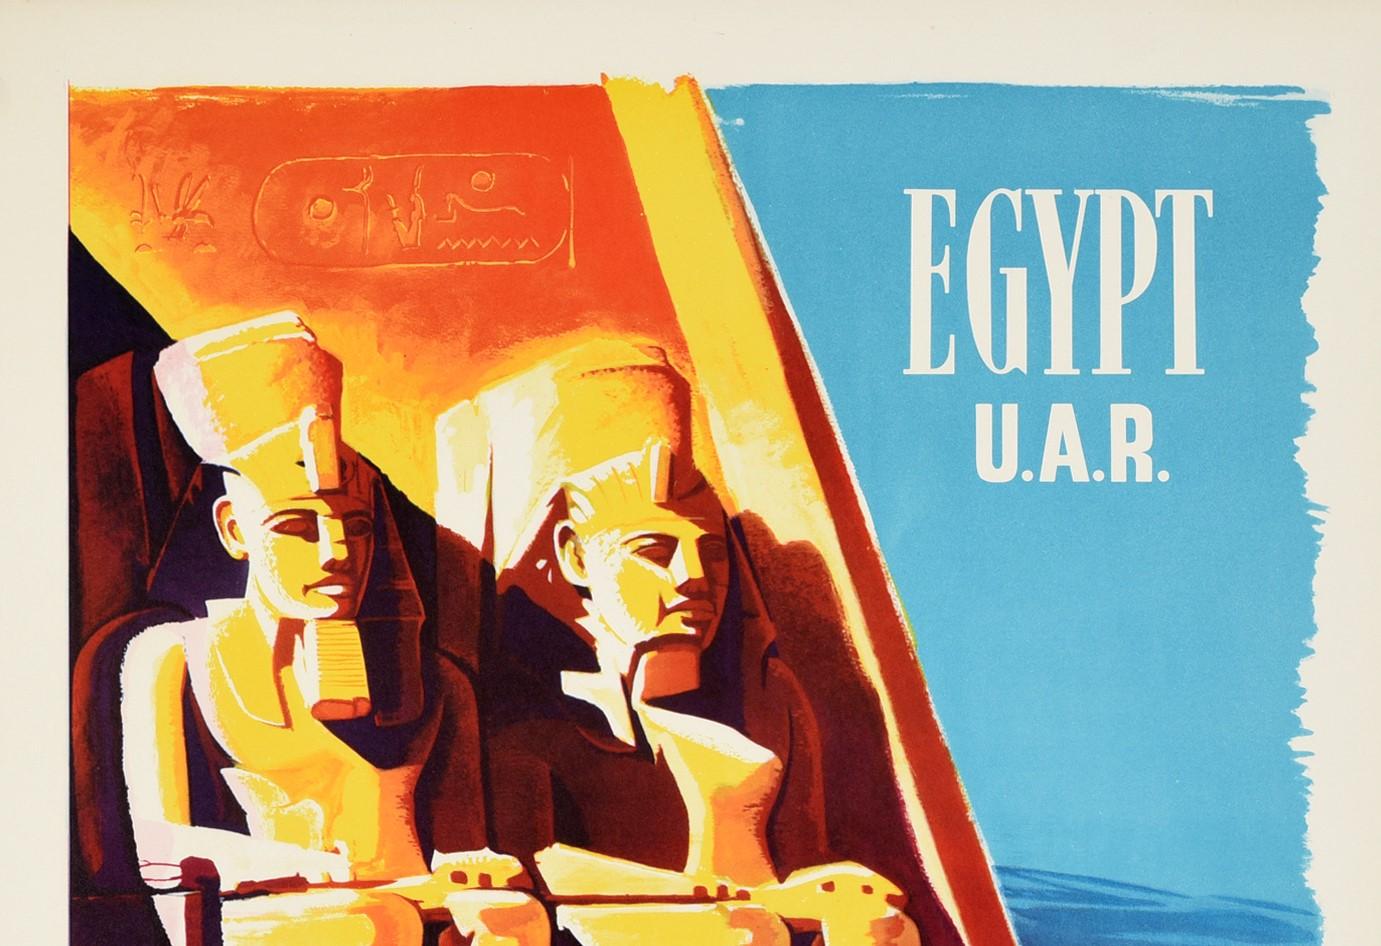 Original vintage travel poster for Egypt featuring a great image of tourists admiring the iconic Abu Simbel Temple and ancient hieroglyphics carved on the rock above with a sailing boat visible on the side and the title text in white against the